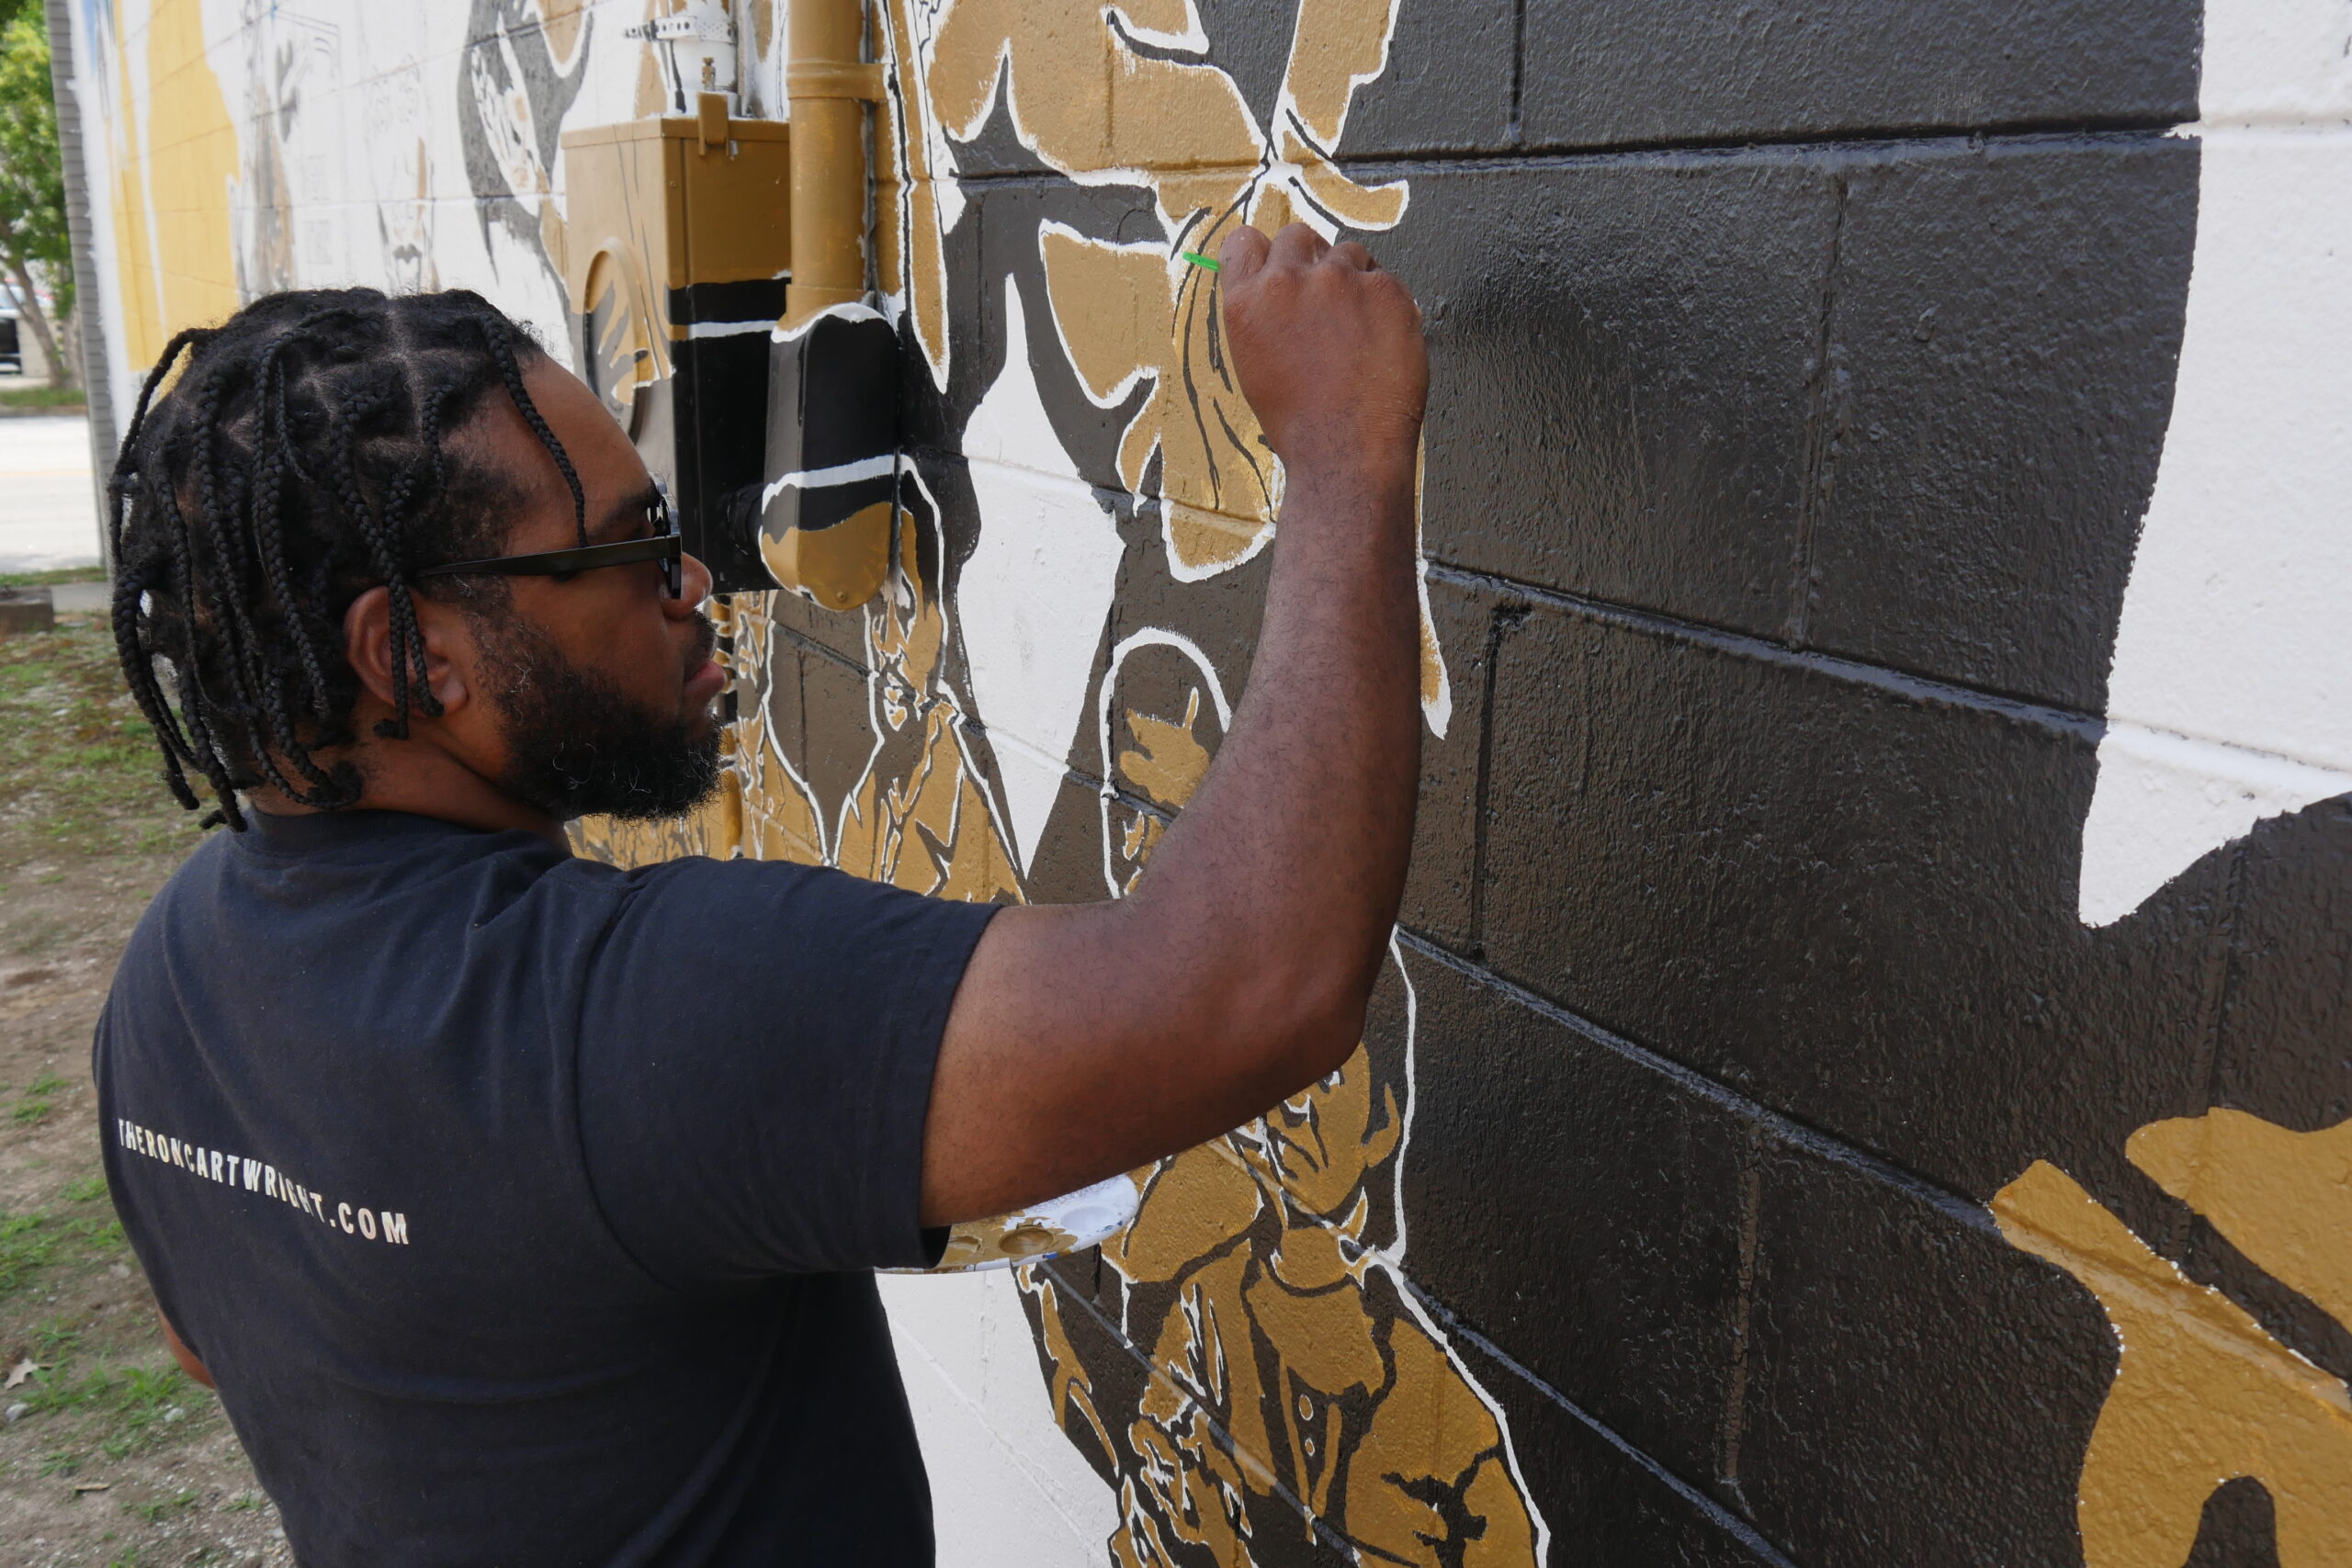 African American man painting a mural. He has short dreaded hair and is wearing sunglasses, a black graphic t-shirt and jeans.